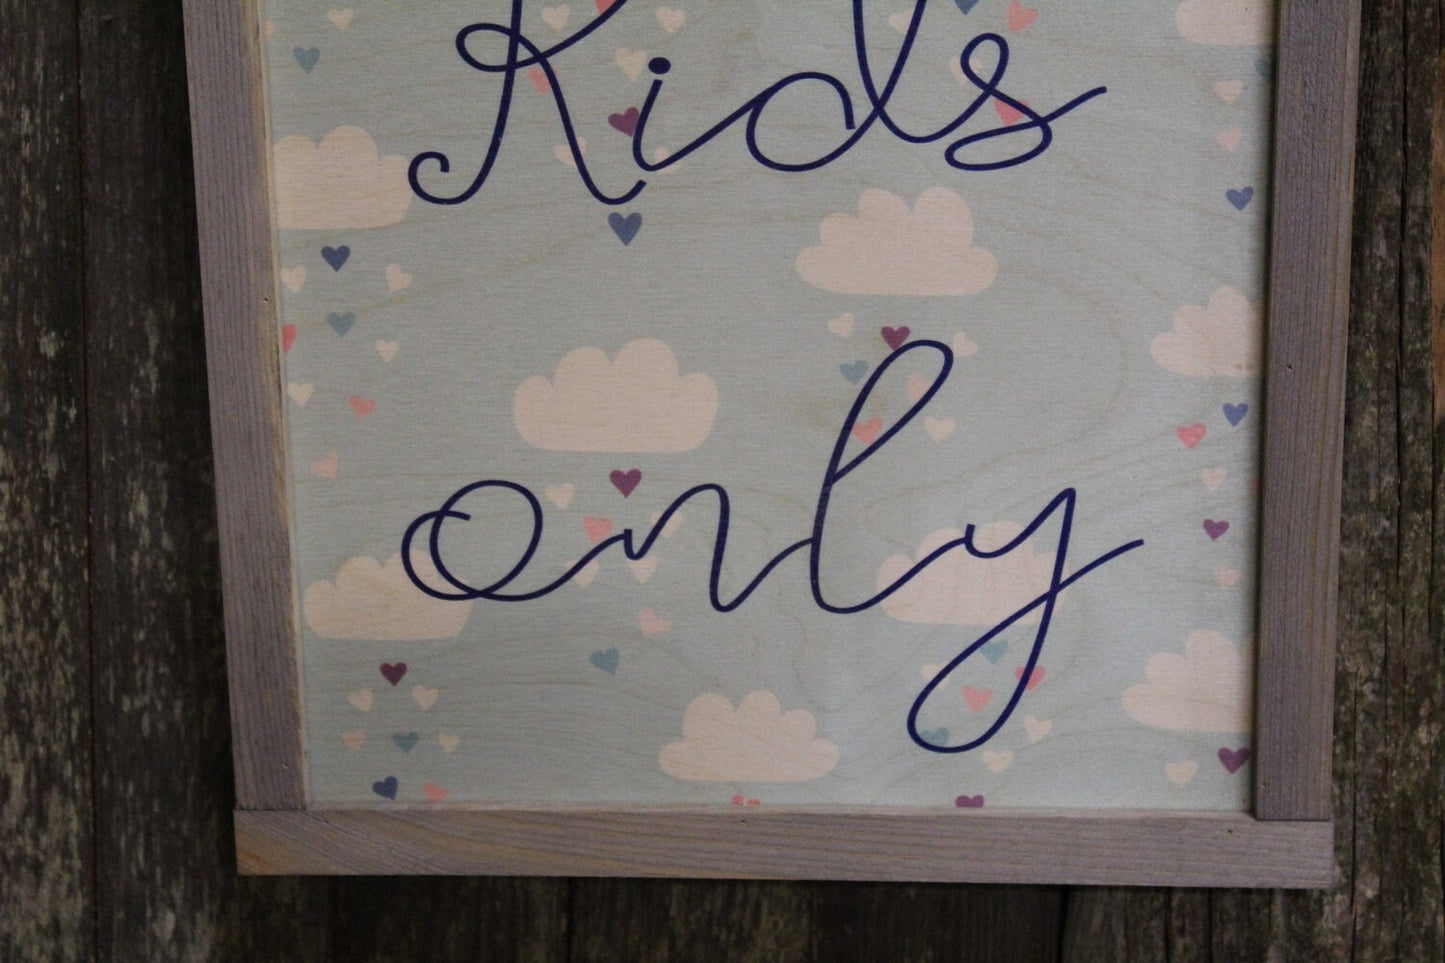 Kids Only Wood Sign Club House Room Play Room Sign Gray Framed Print Clouds Wall Art Farmhouse Primitive Rustic Decoration Decor